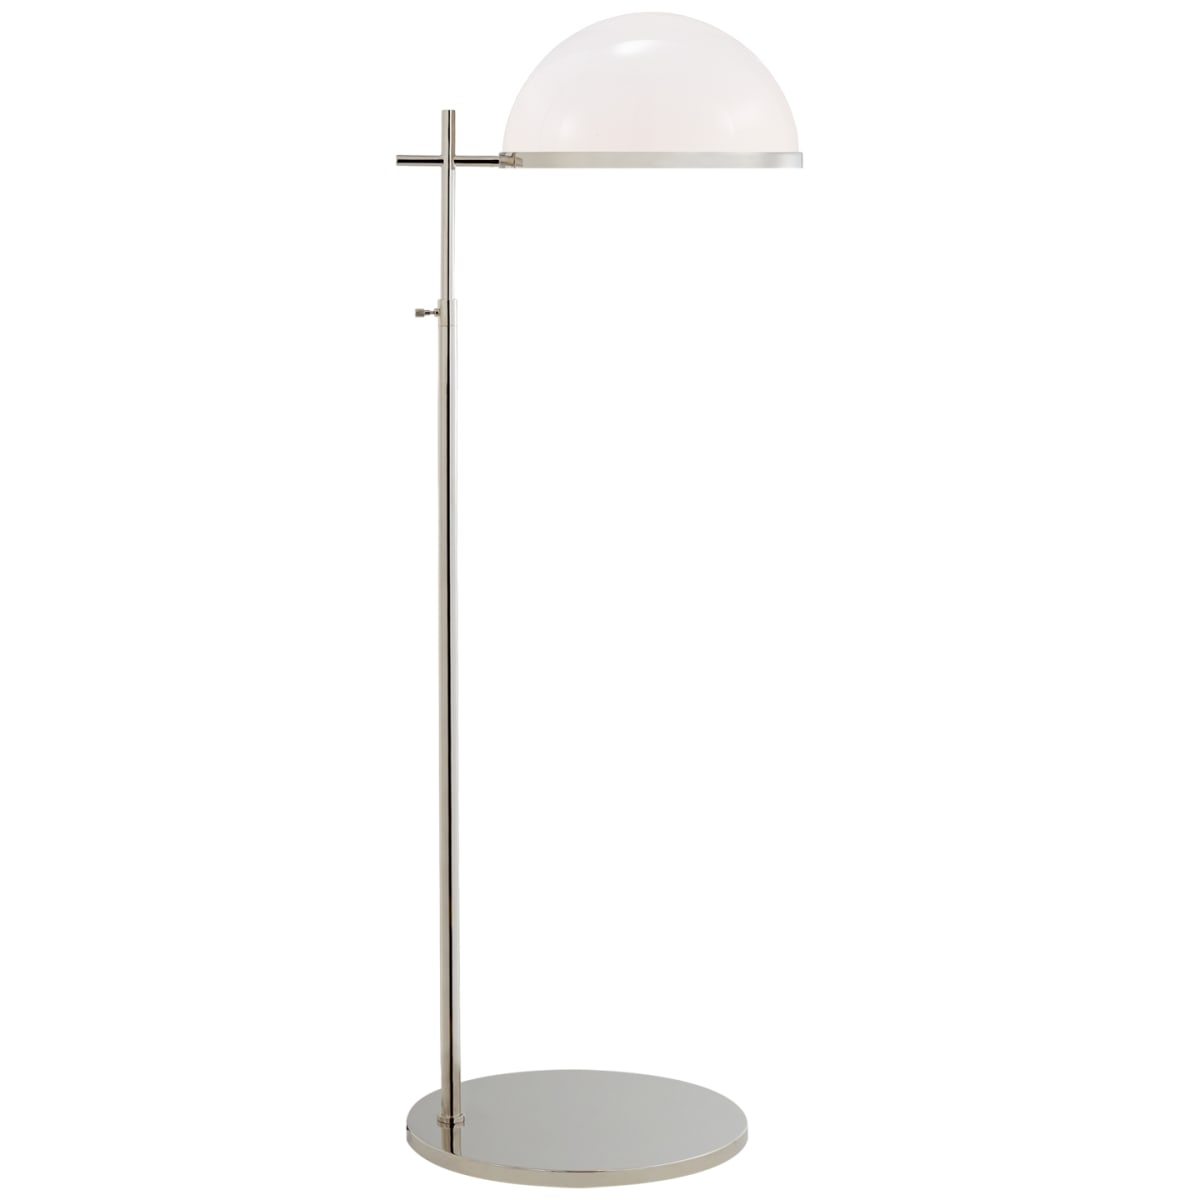 Kelly Wearstler Troye Medium Table Lamp in Antique-Burnished Brass wit